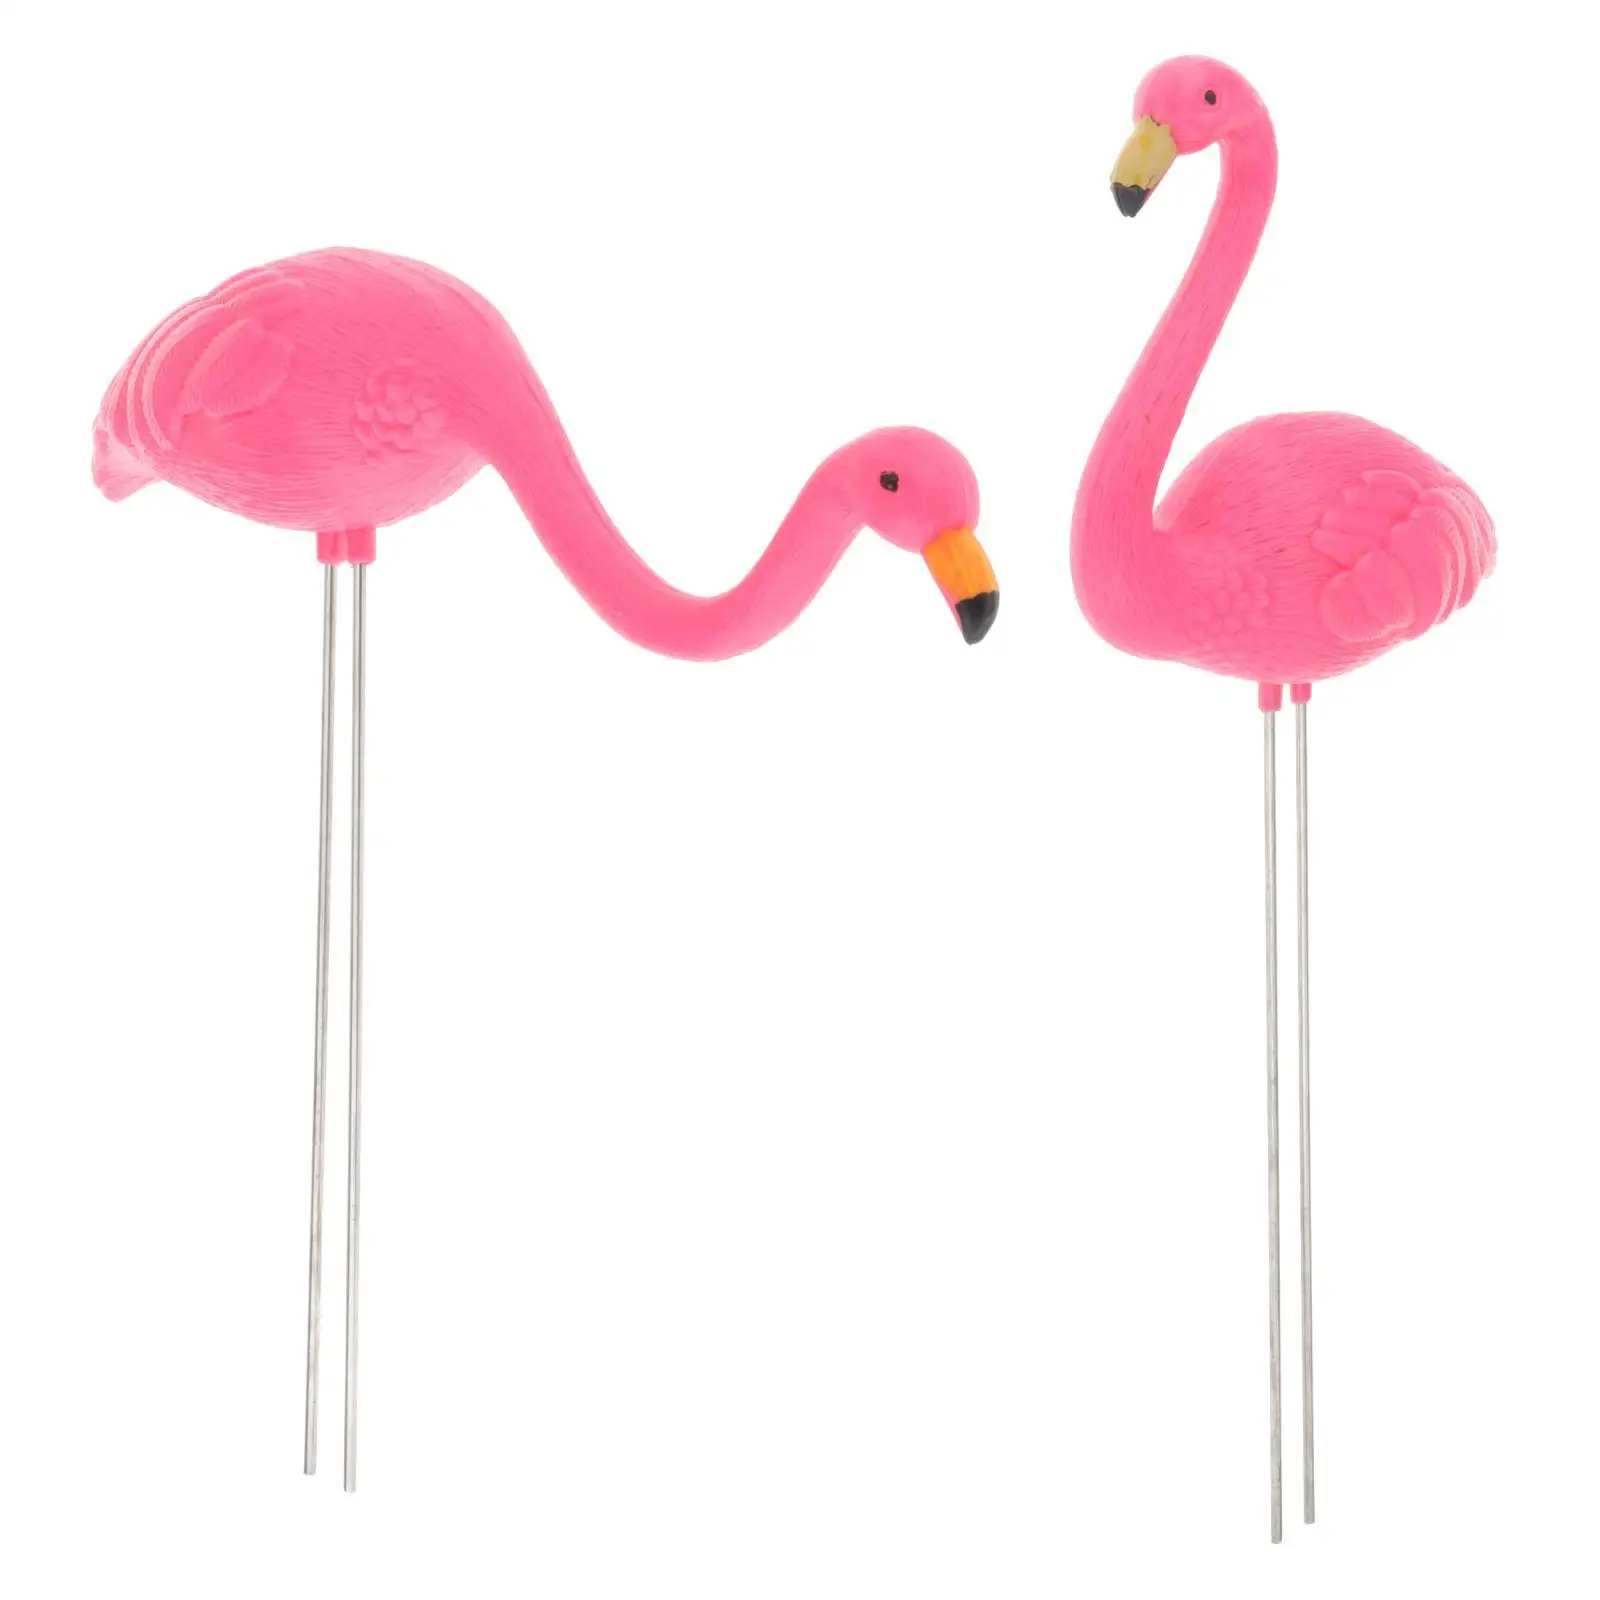 Flamingo Garden Stake Statue Figurines Yard Ornament Decorations Backyard Porch Outdoor Lawn for Festive Holiday Beach Entryway